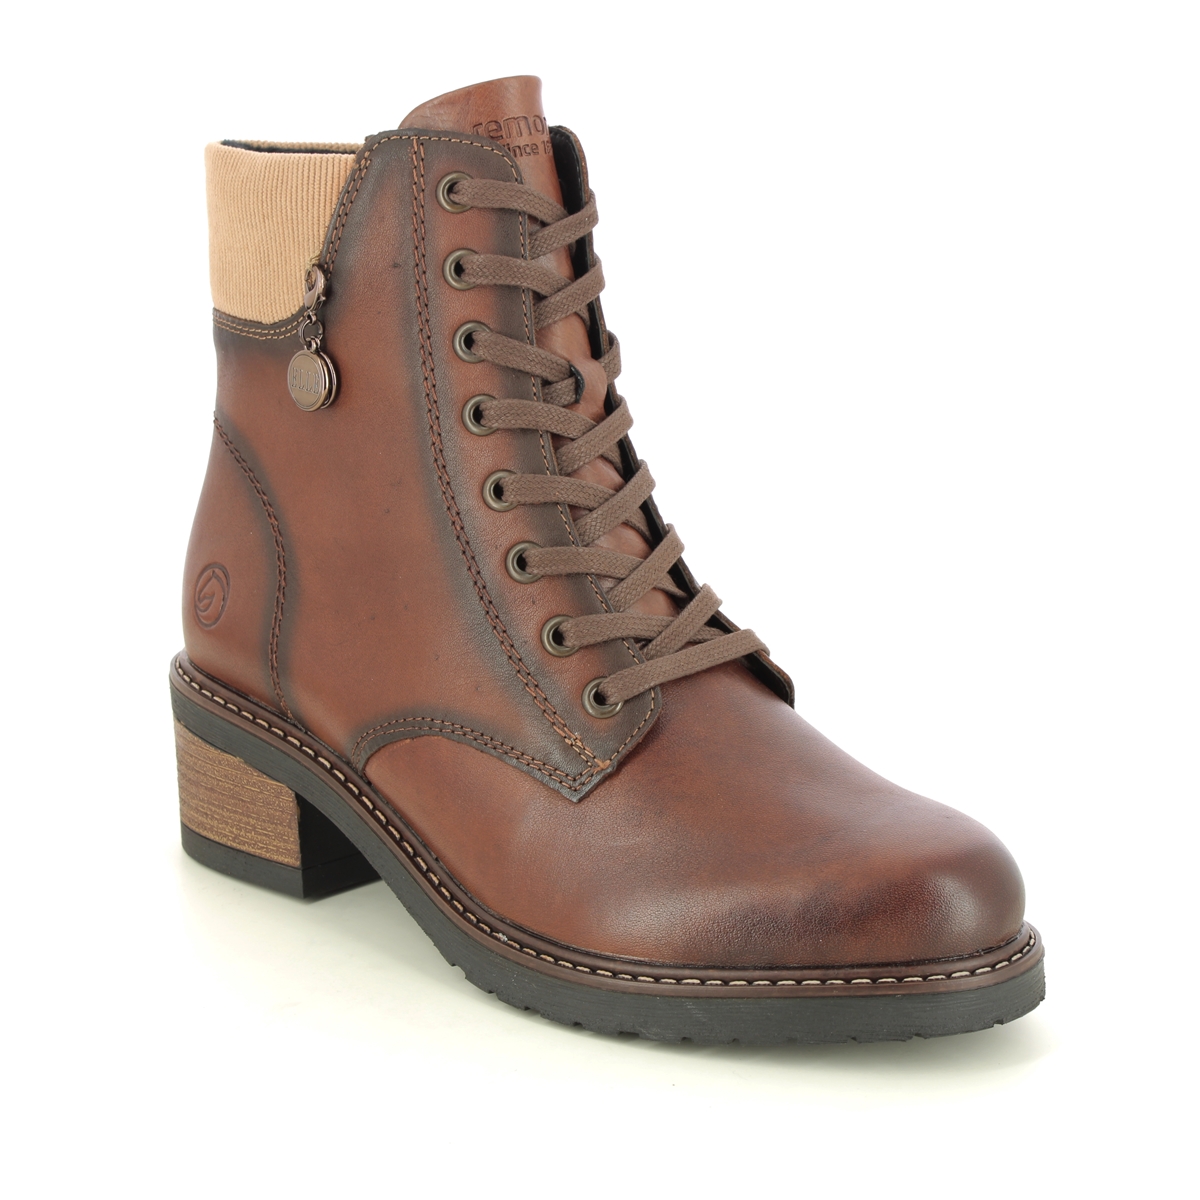 Remonte Menarem Elle Brown Leather Womens Lace Up Boots D1A70-22 In Size 38 In Plain Brown Leather